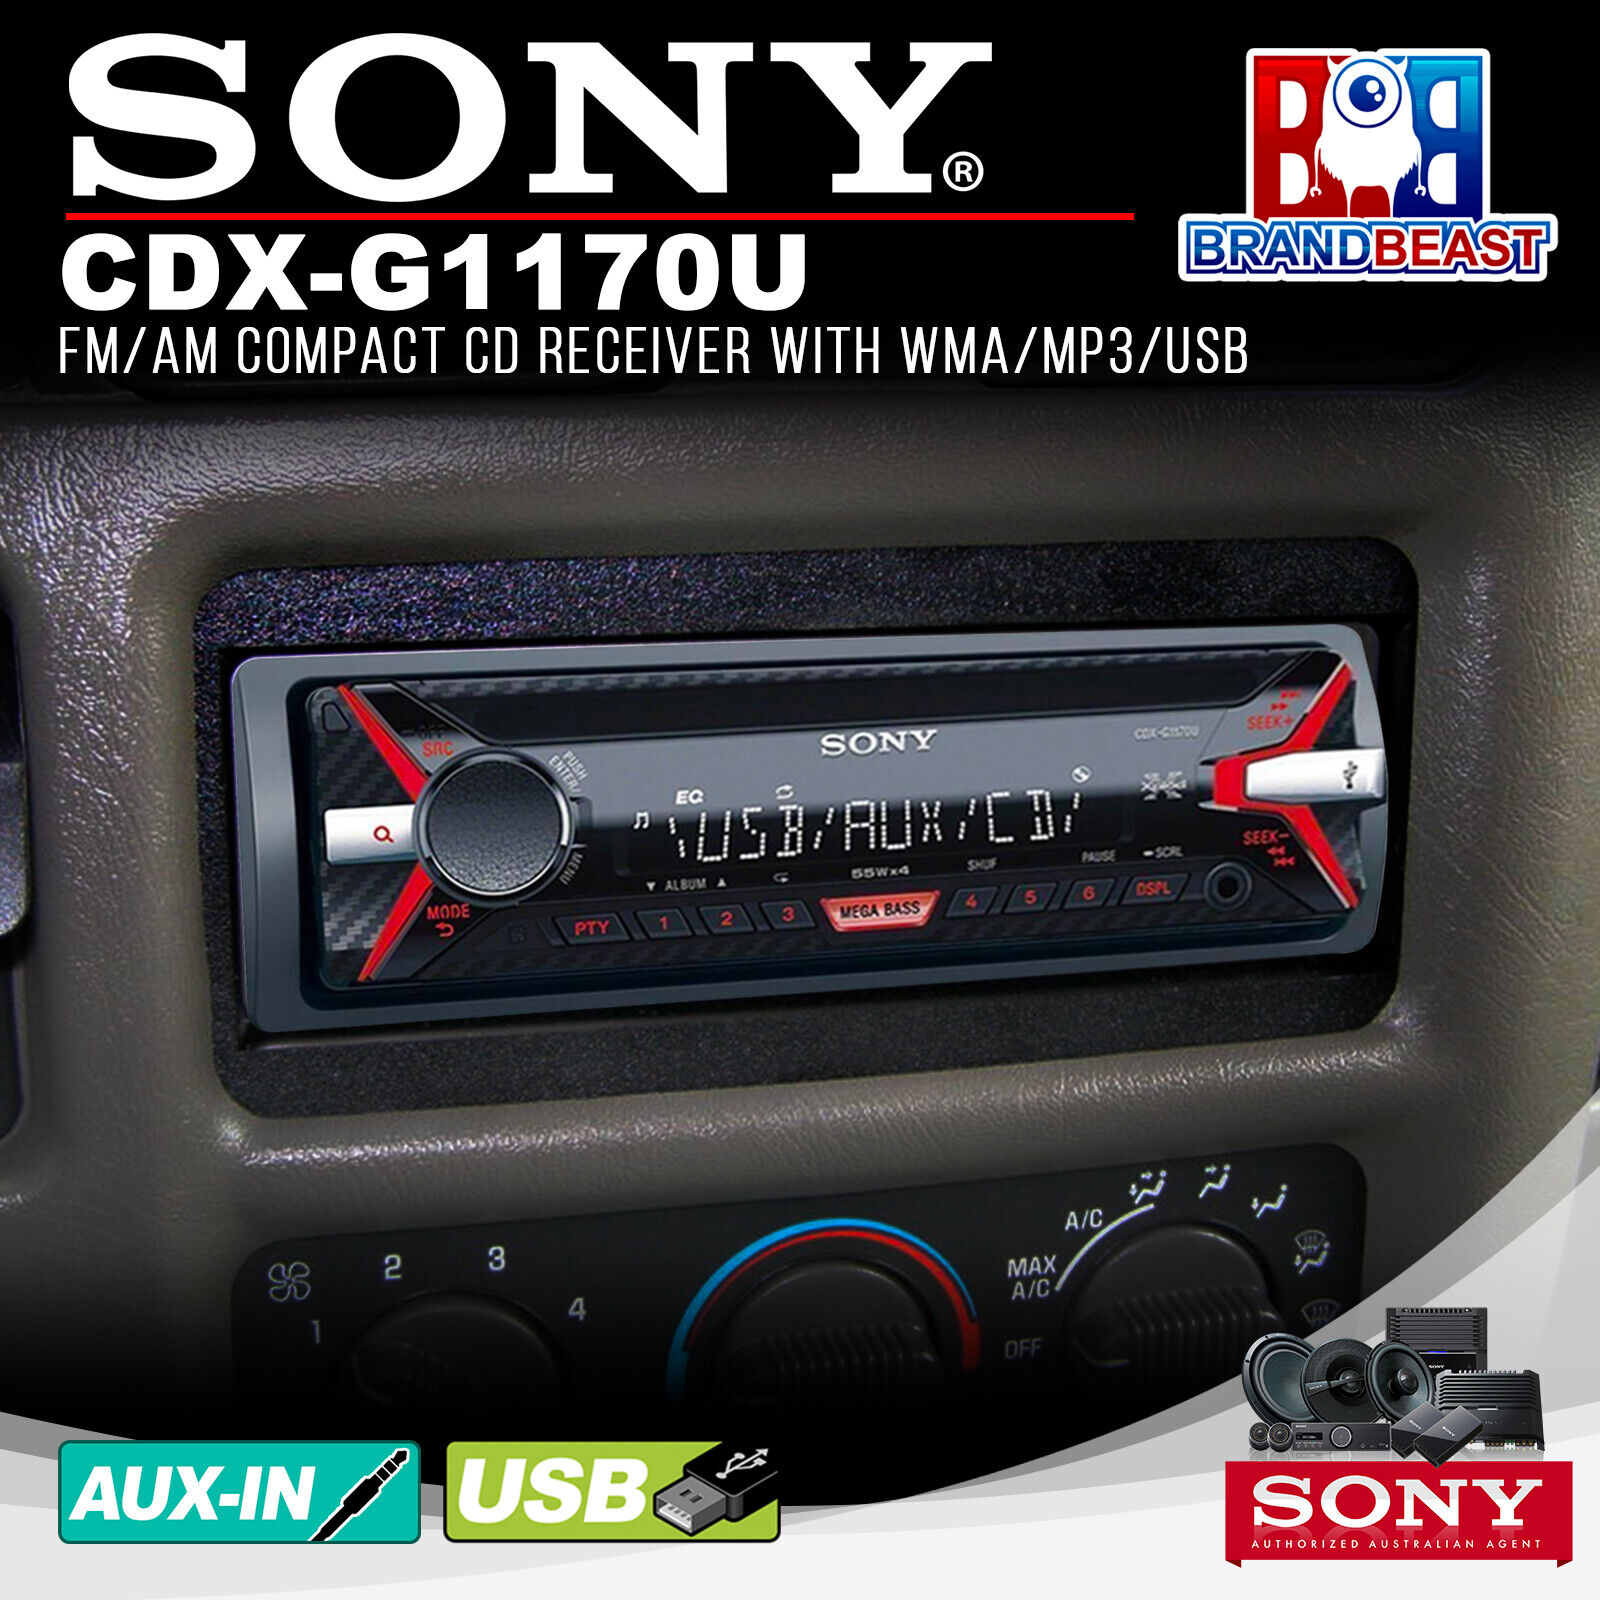 Pioneer FH-S725BT Car Stereo with Dual Bluetooth, USB/AUX -  www.